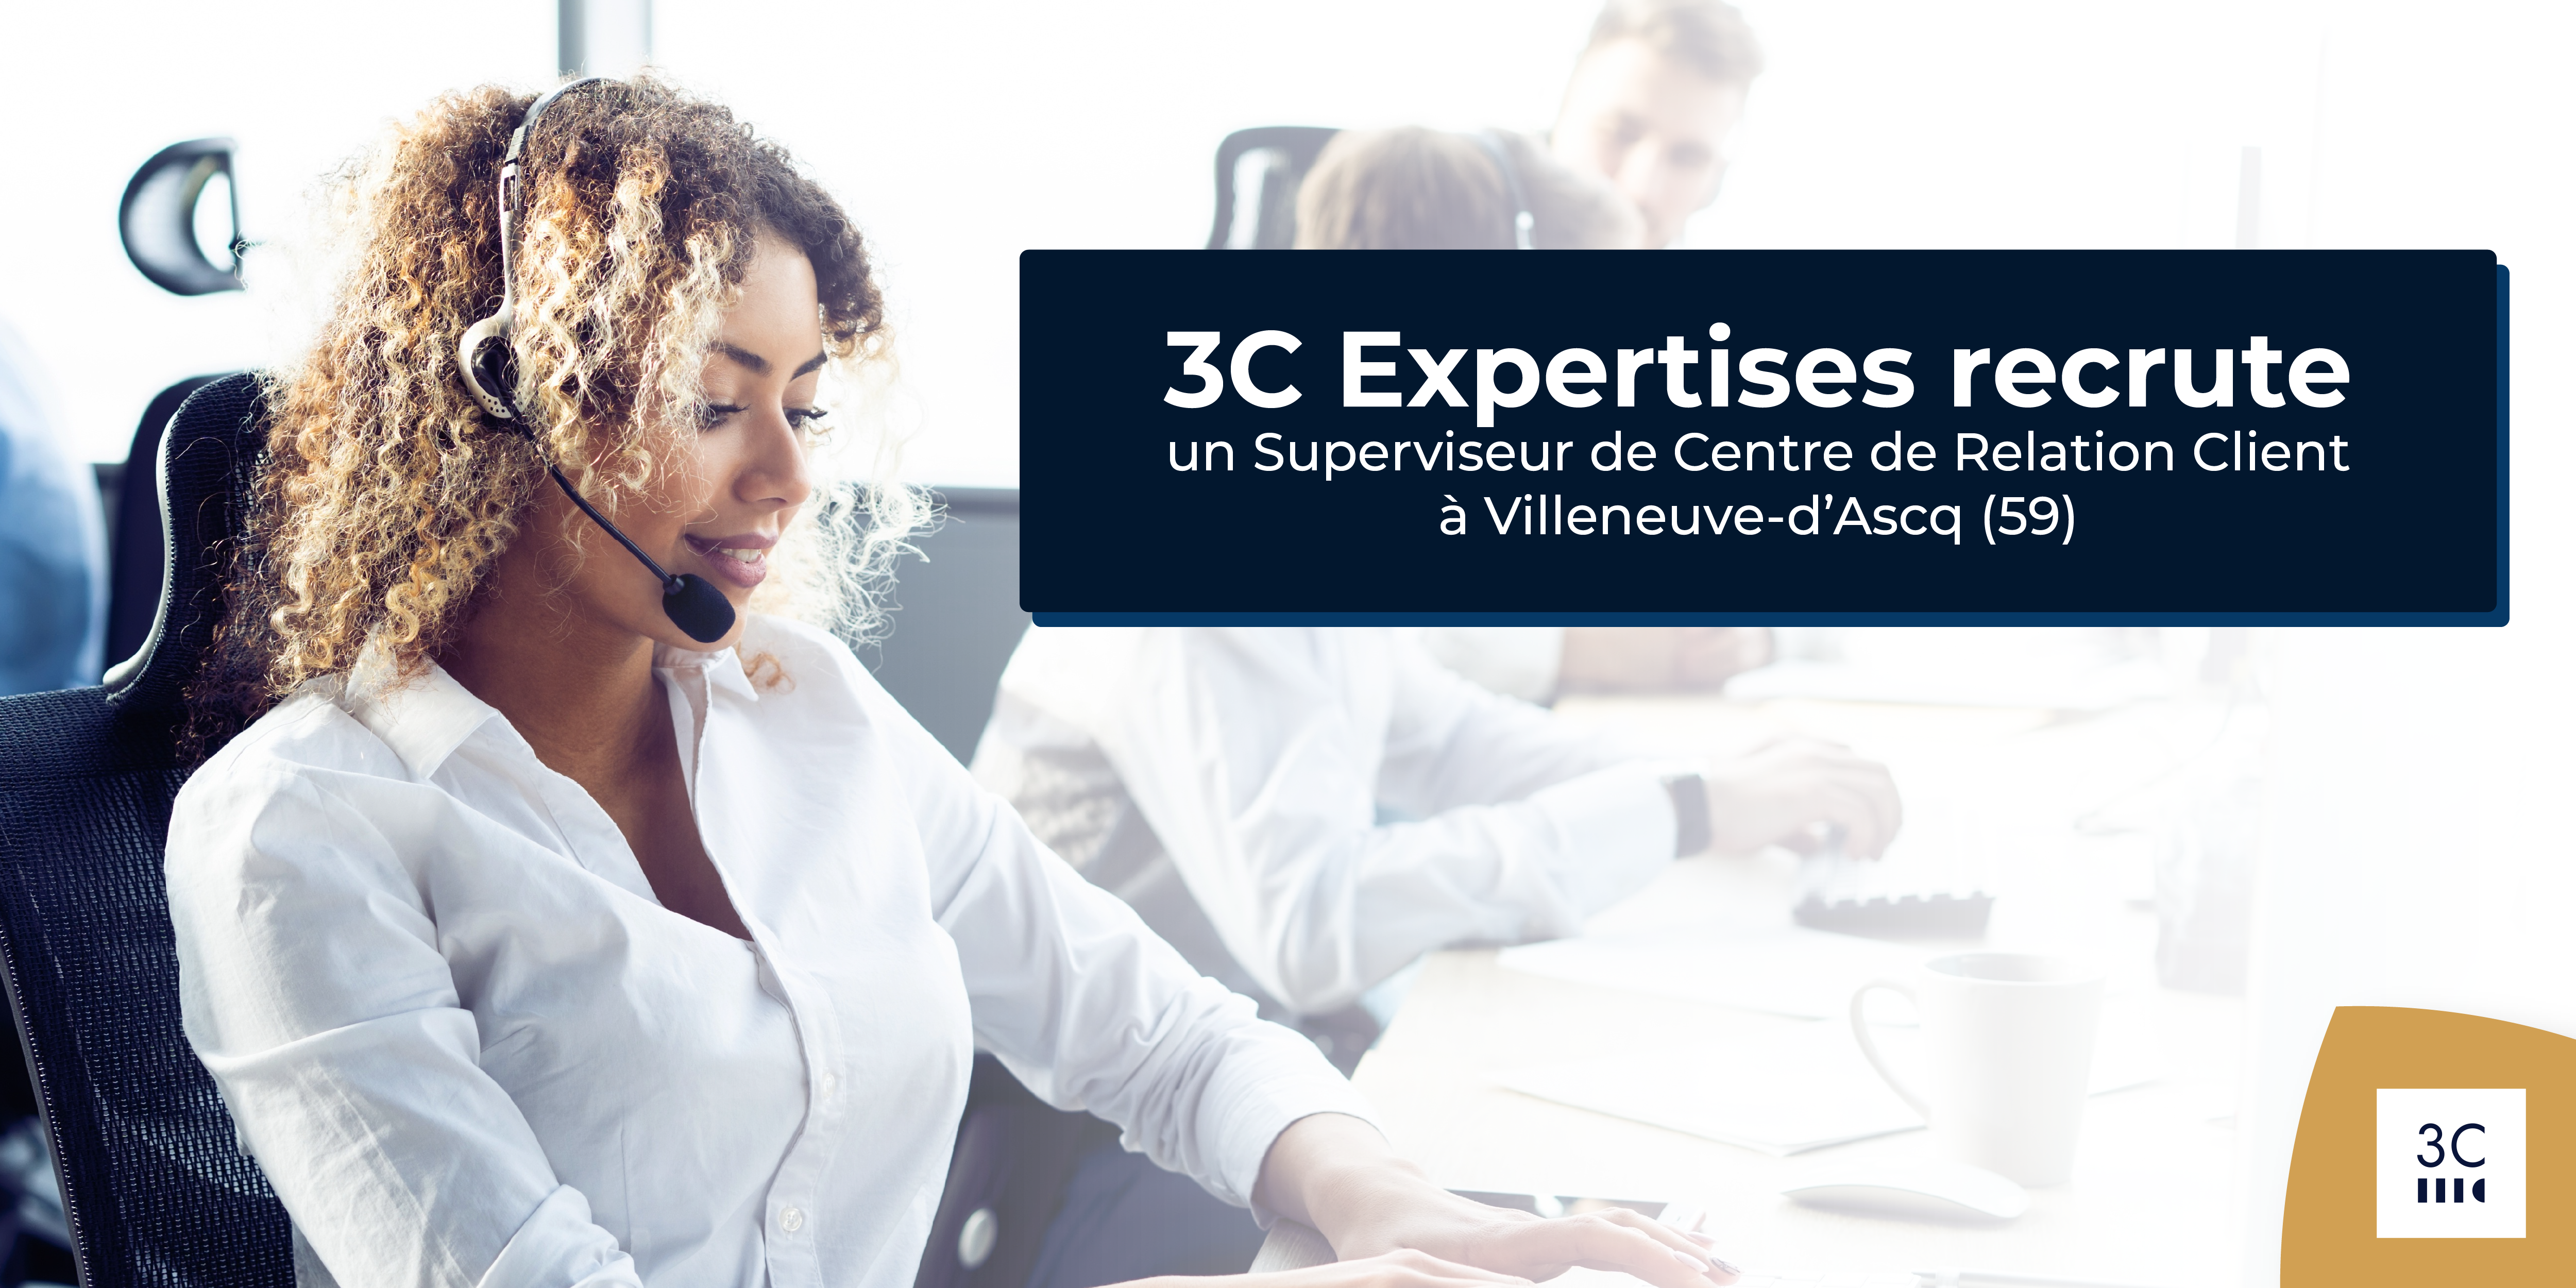 You are currently viewing 3C Expertises is recruiting a Customer Relationship Center Supervisor M/F in Villeneuve-d’Ascq (59). 👥